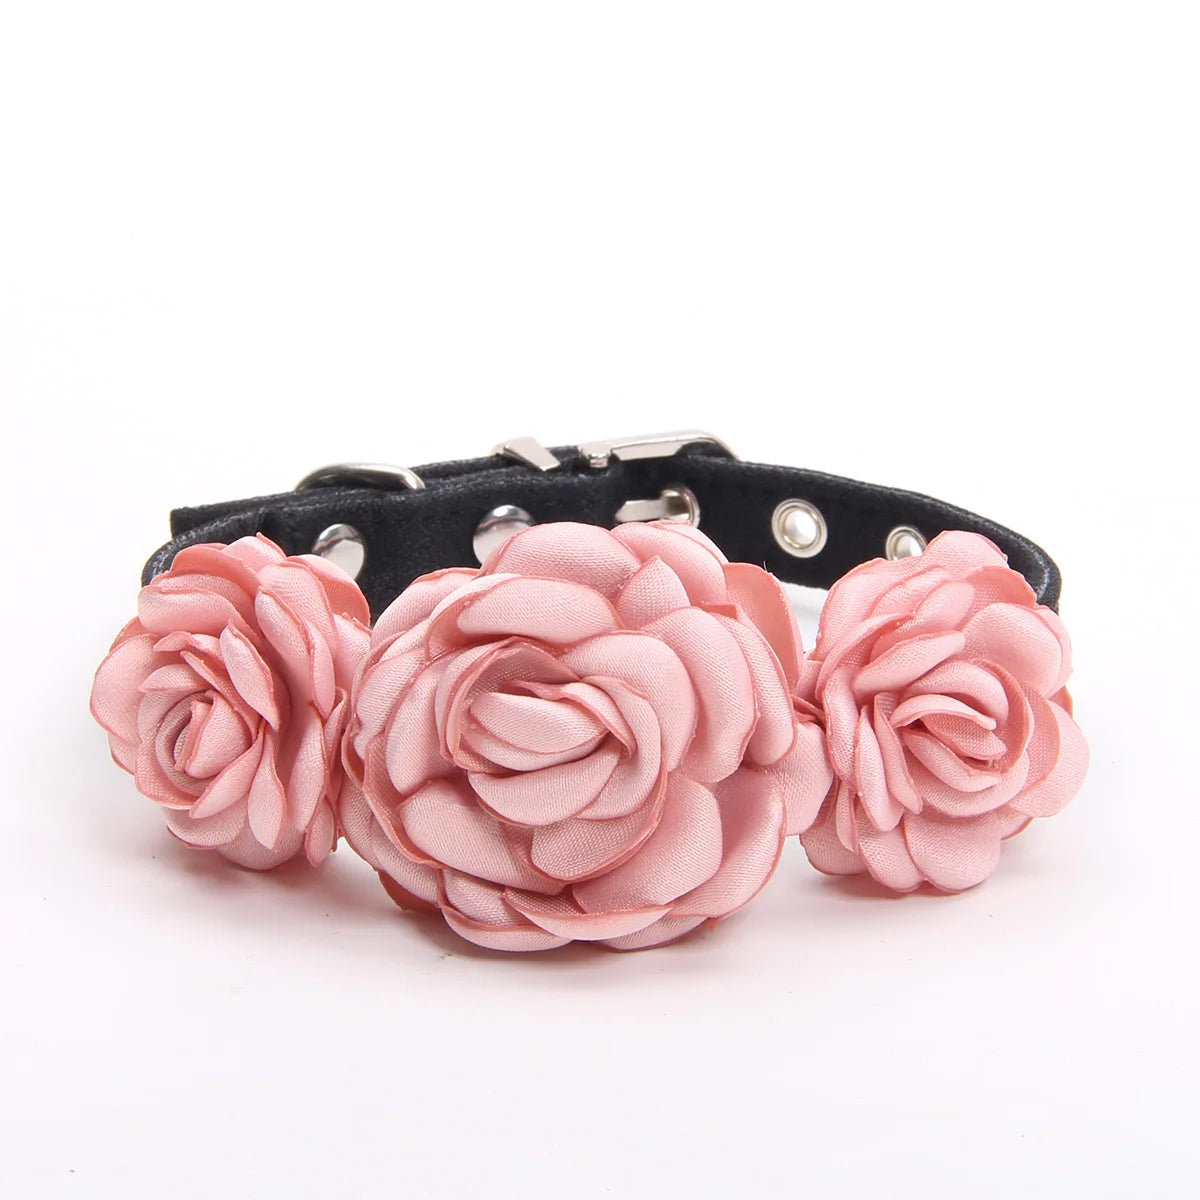 The Roses Collar